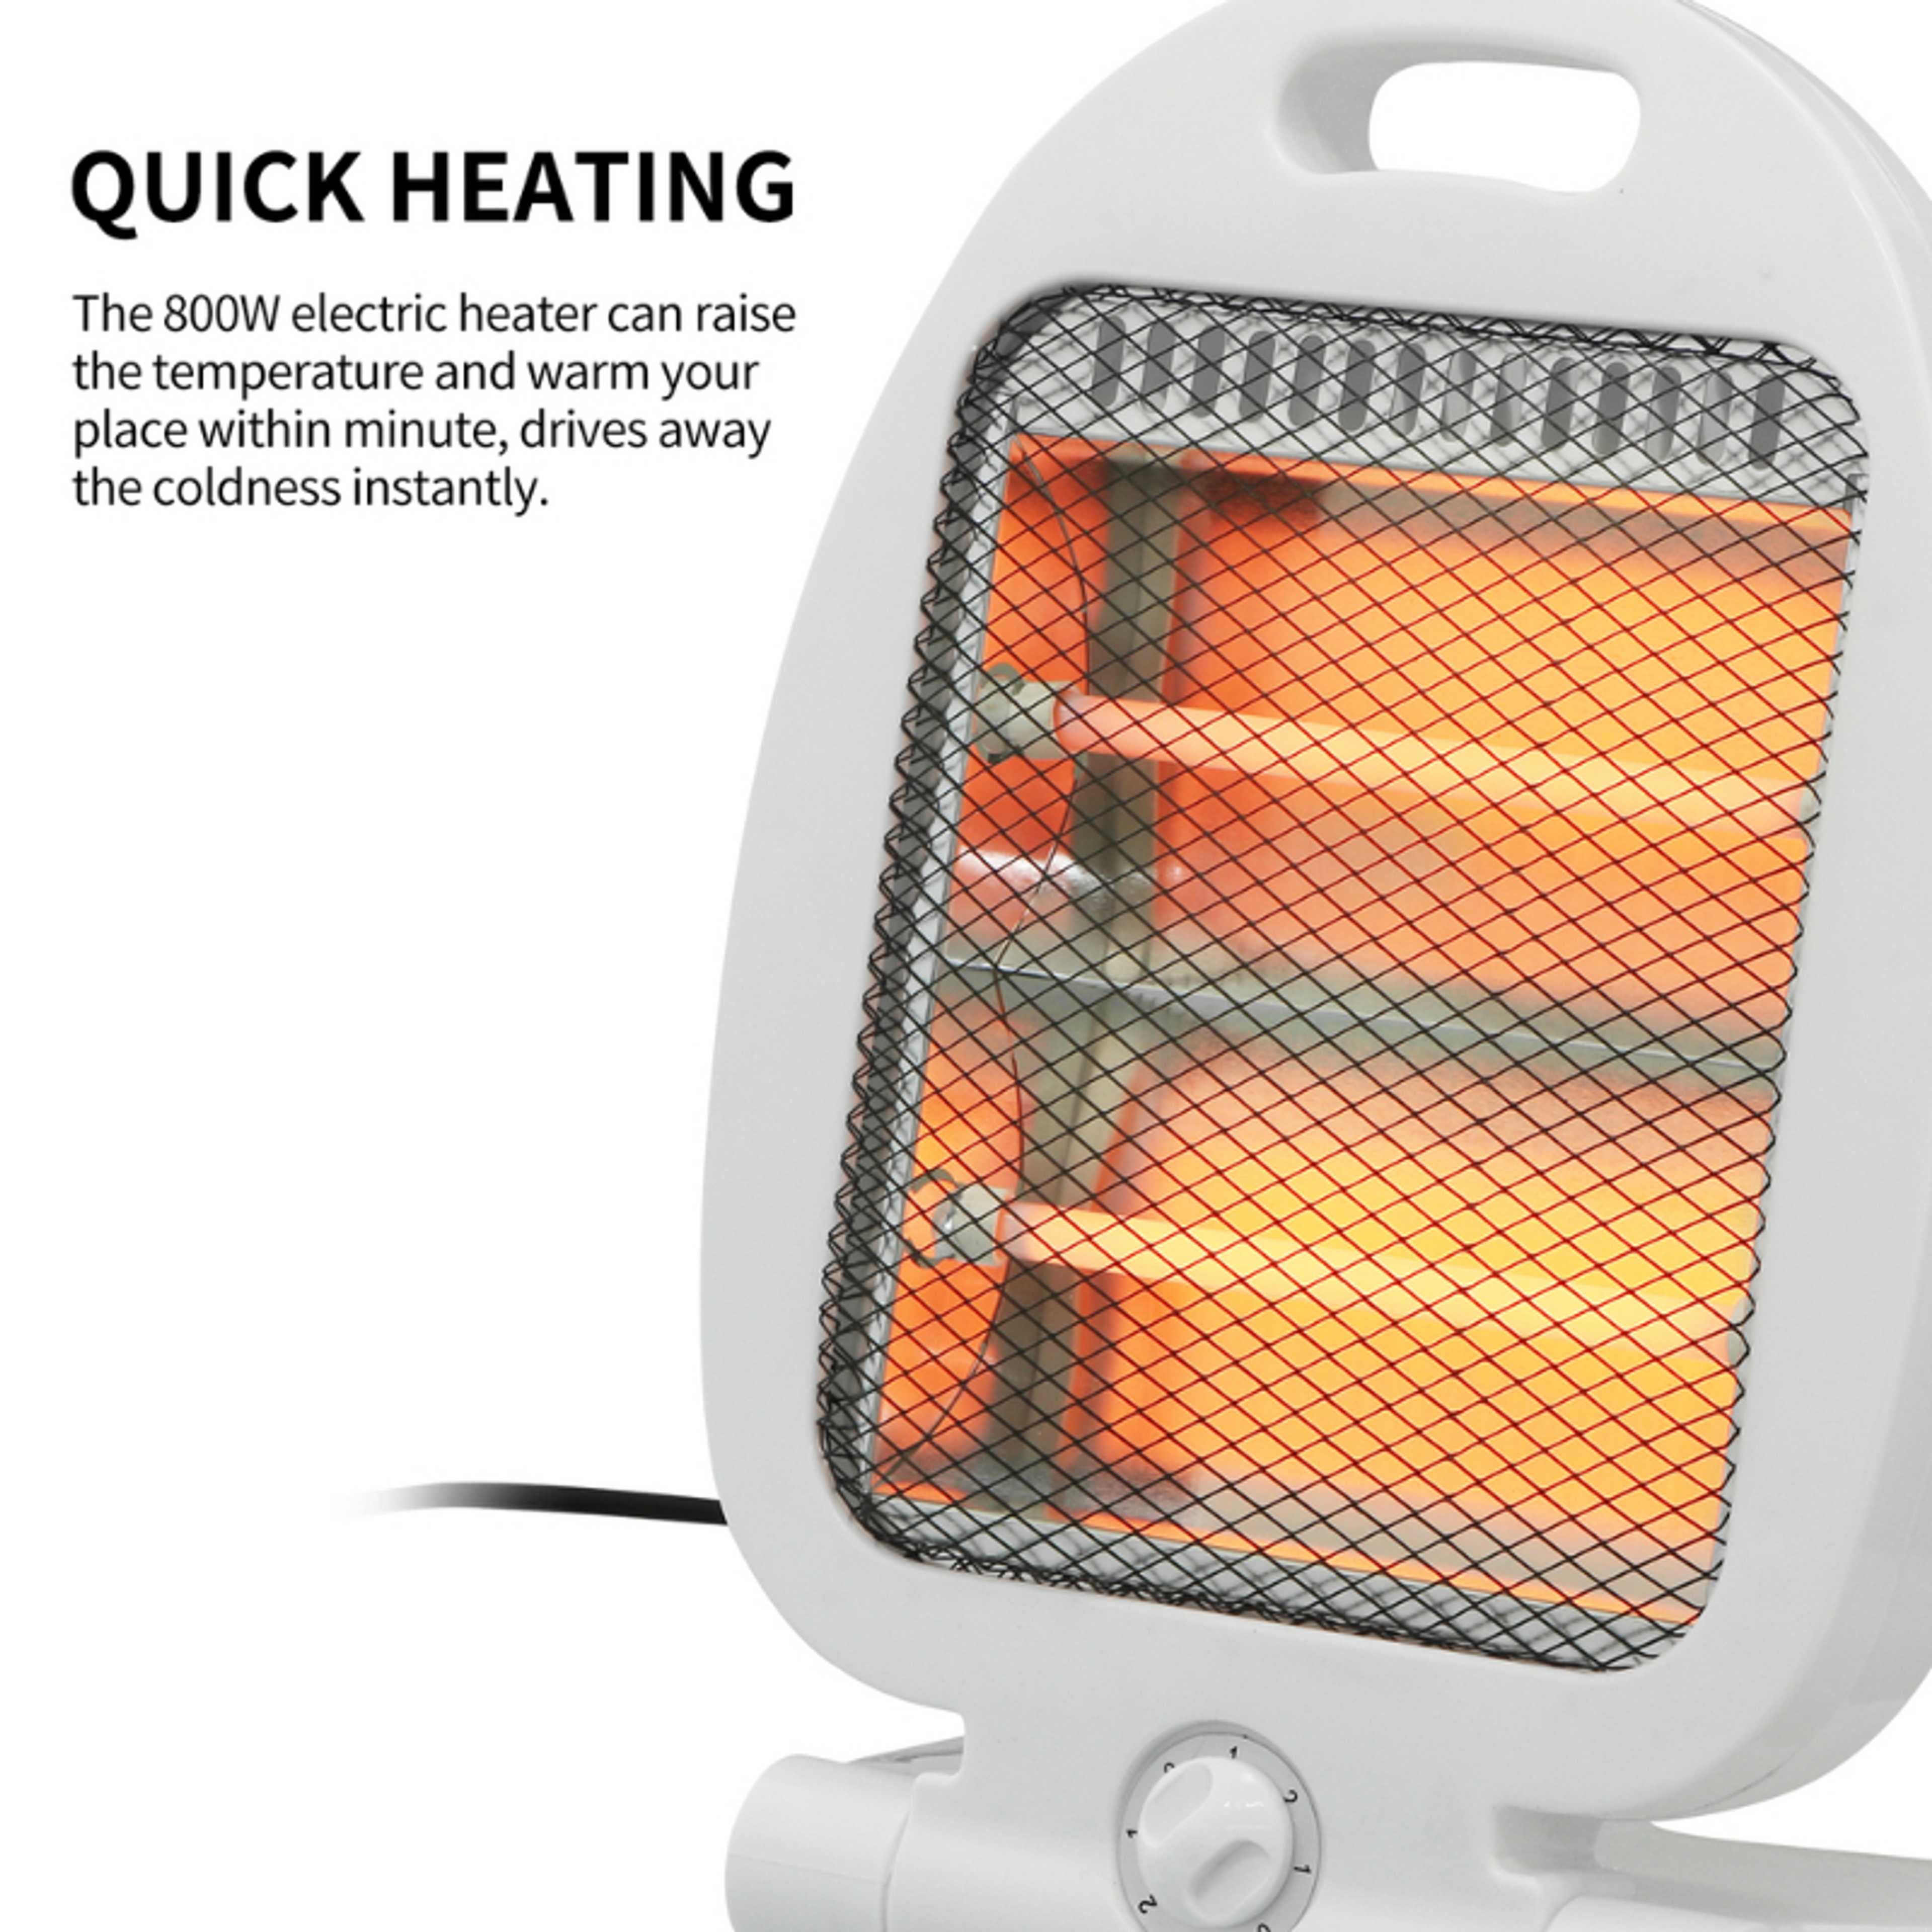 Renova 800W Instant Heating Portable Electric Quartz Heater With Auto Tip-Over Protection